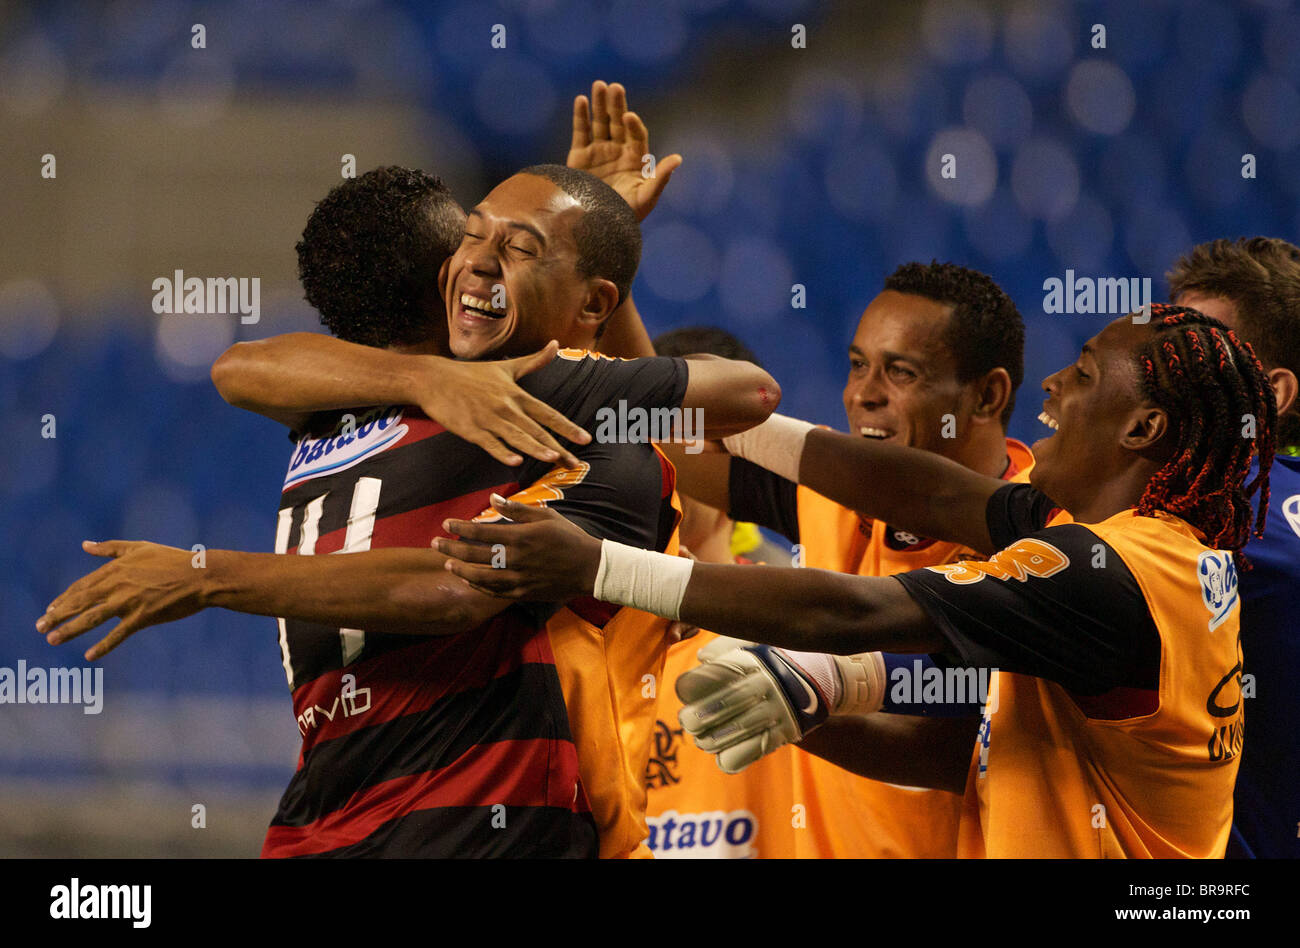 David is congratulated by team mates after scoring Flamengo's second goal during the Flamengo V Fluminense, football match. Stock Photo